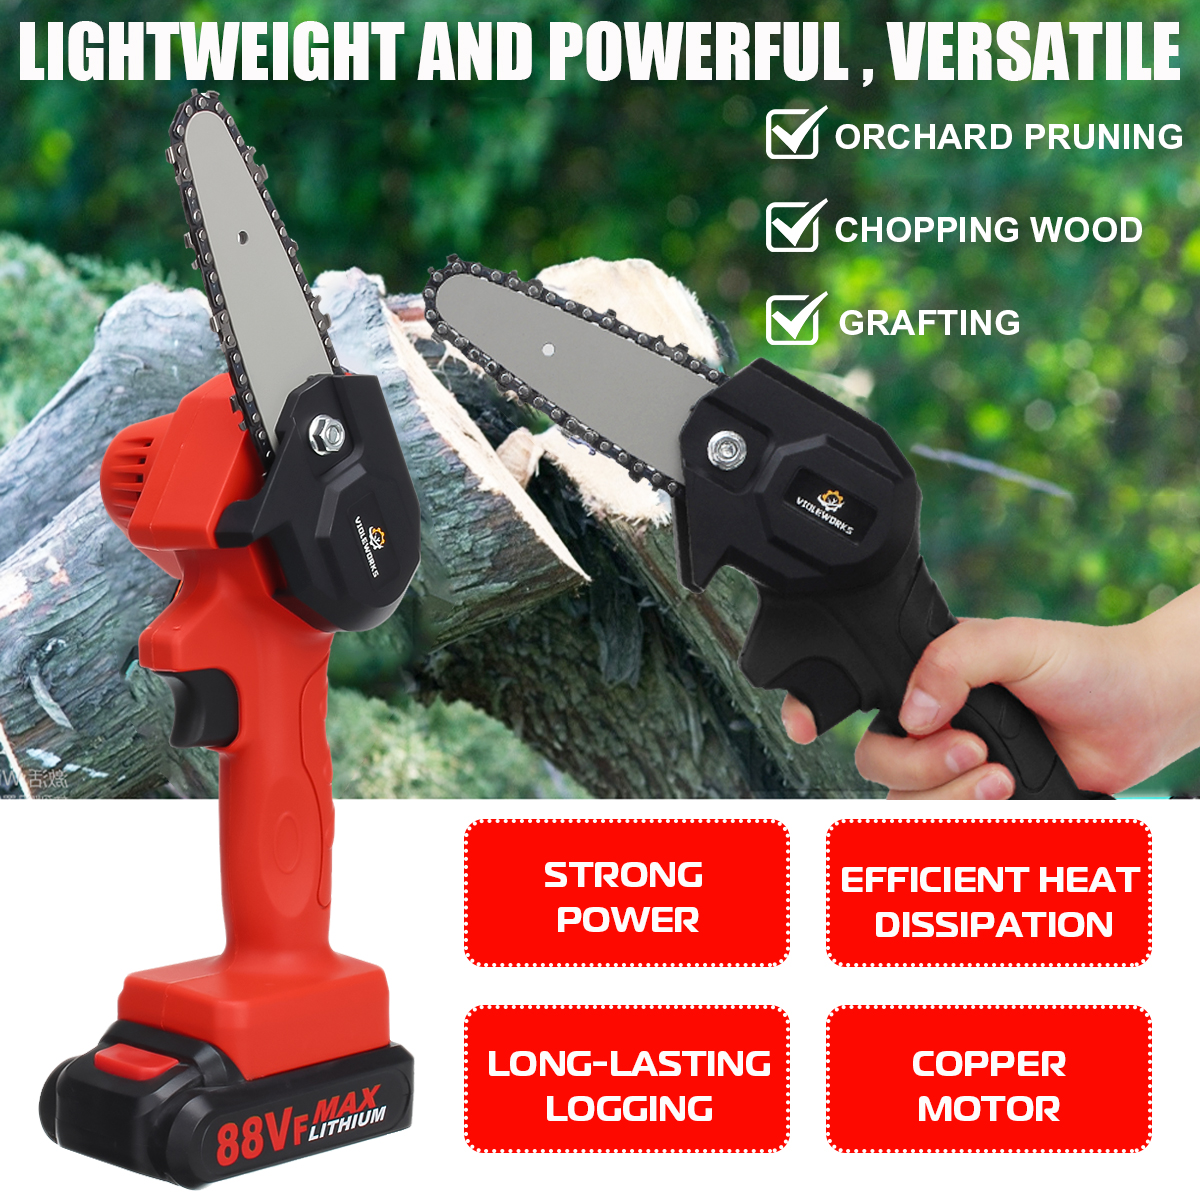 VIOLEWORKS-4-Inch-88VF-Cordless-Electric-Chain-Saw-1500W-One-Hand-Saw-Woodworking-Wood-Cutter-W-12-B-1868917-3